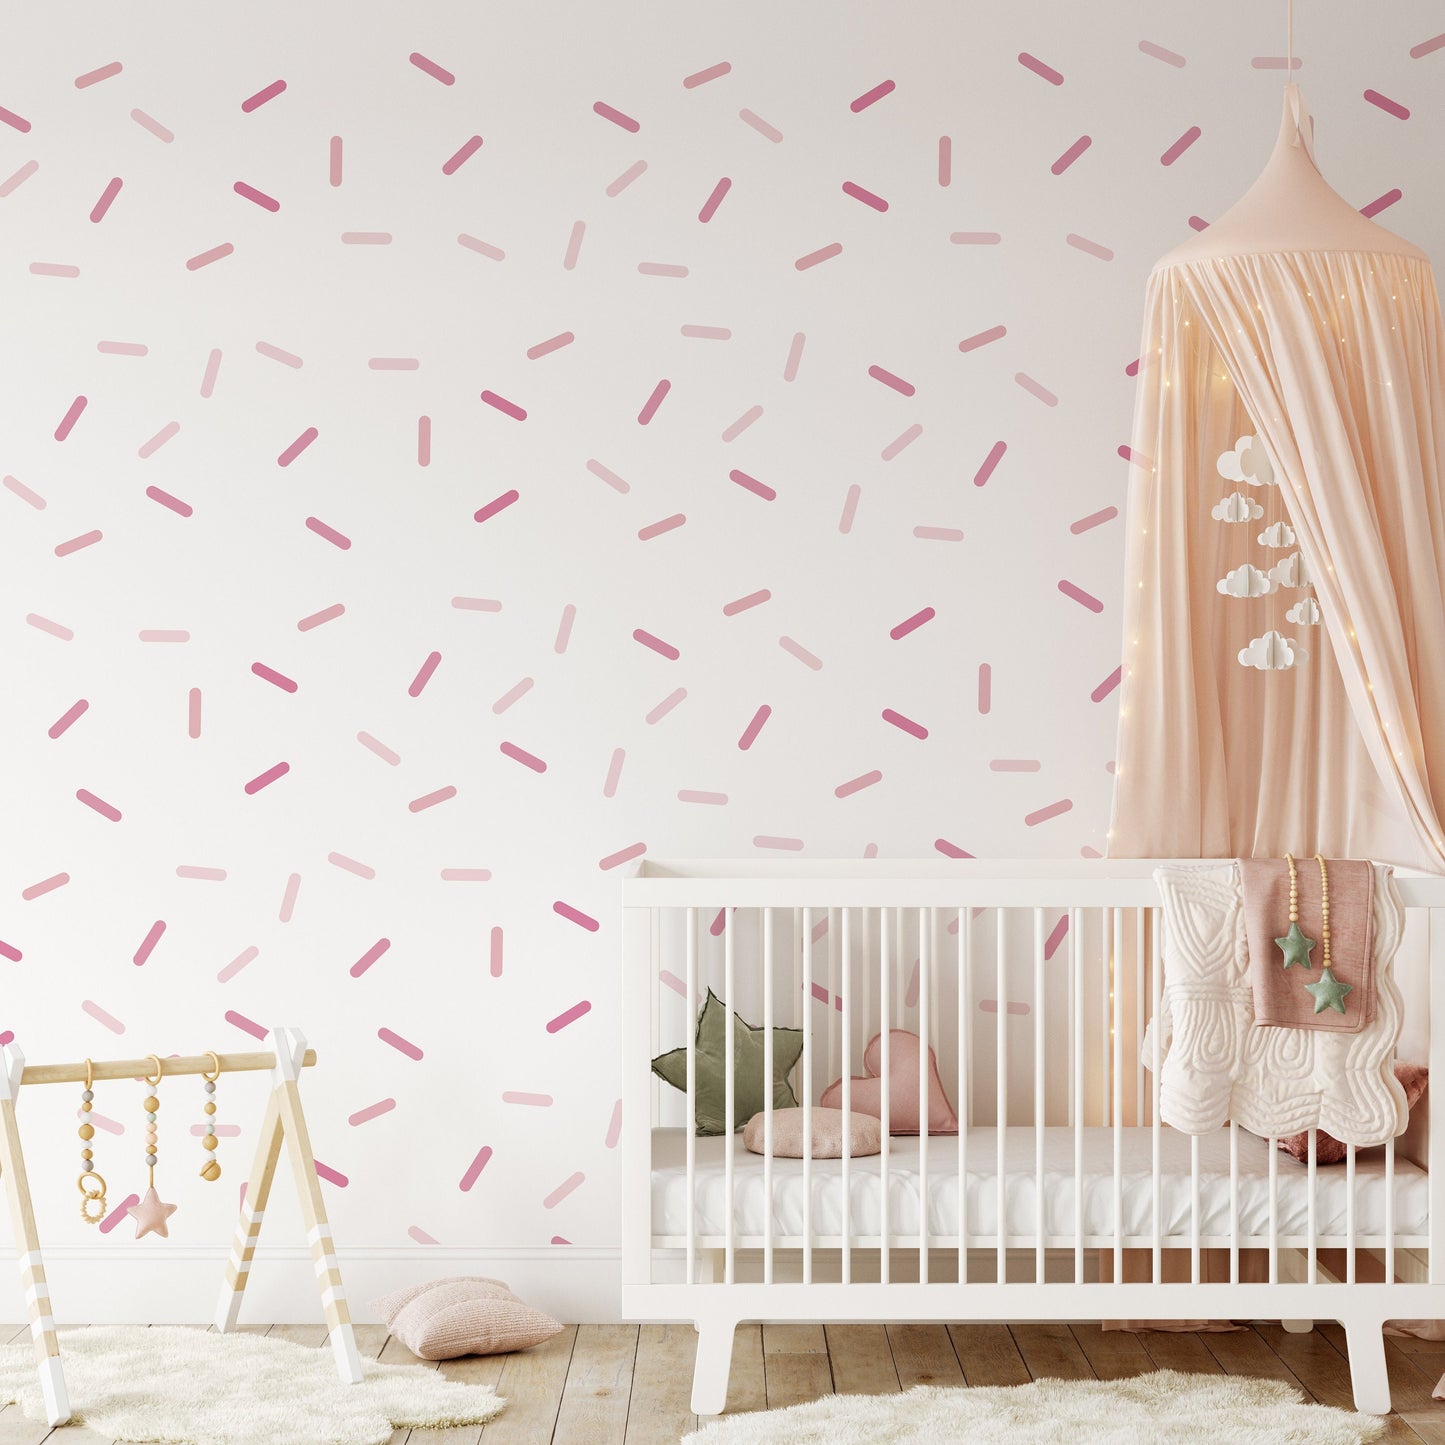 Sprinkle Wall Stickers Pink Colours Removable Vinyl Decals For Kids Rooms Nursery Childrens Wall Decor